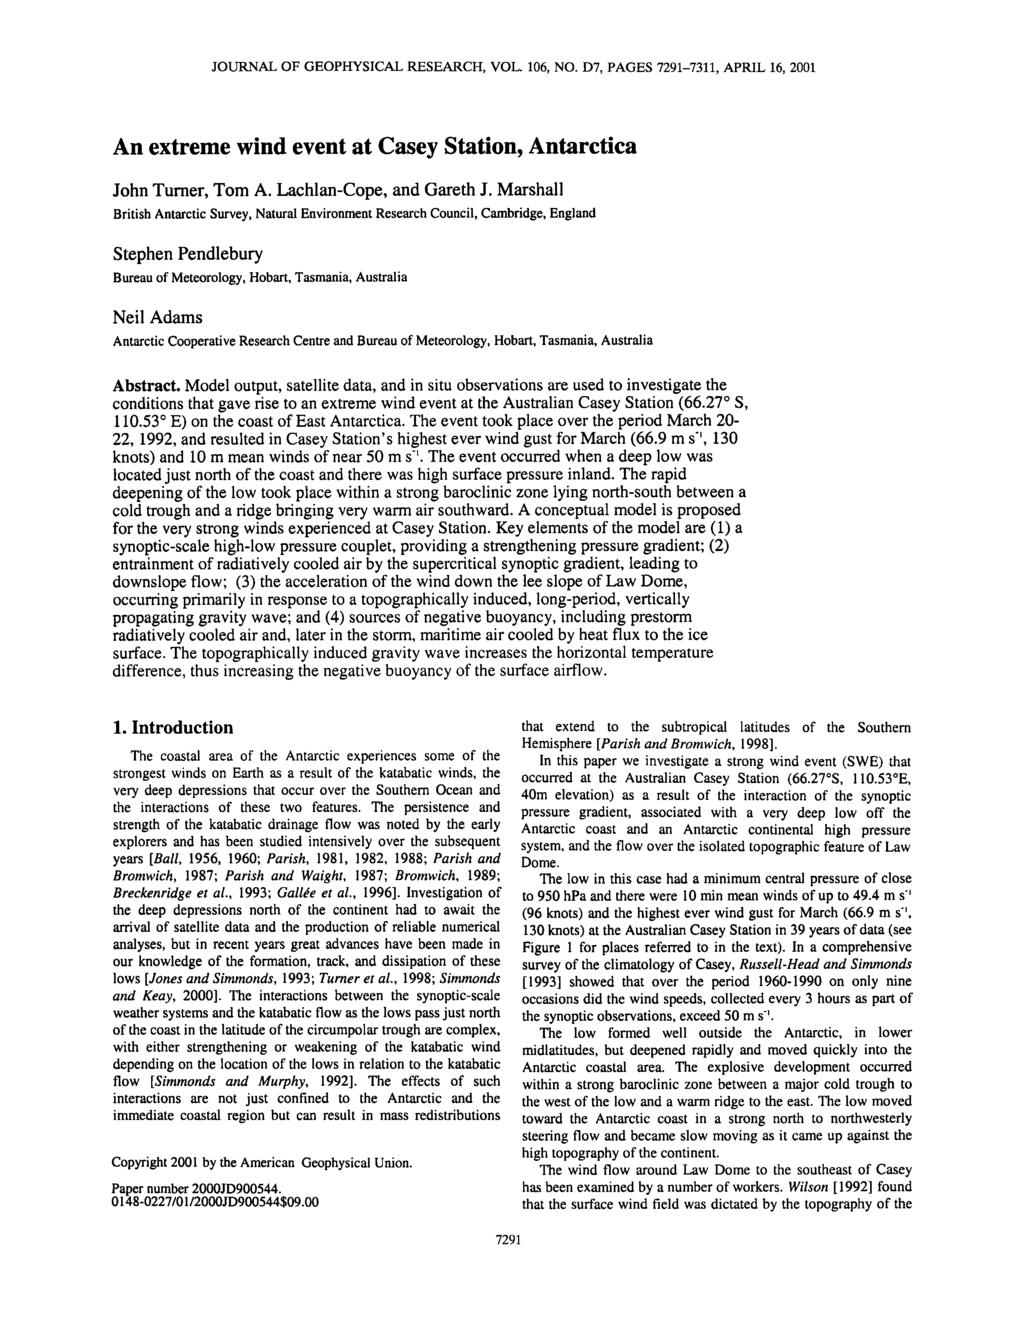 JOURNAL OF GEOPHYSICAL RESEARCH, VOL. 106, NO. D7, PAGES 7291-7311, APRIL 16, 2001 An extreme wind event at Casey Station, Antarctica John Turner, Tom A. Lachlan-Cope, and Gareth J.